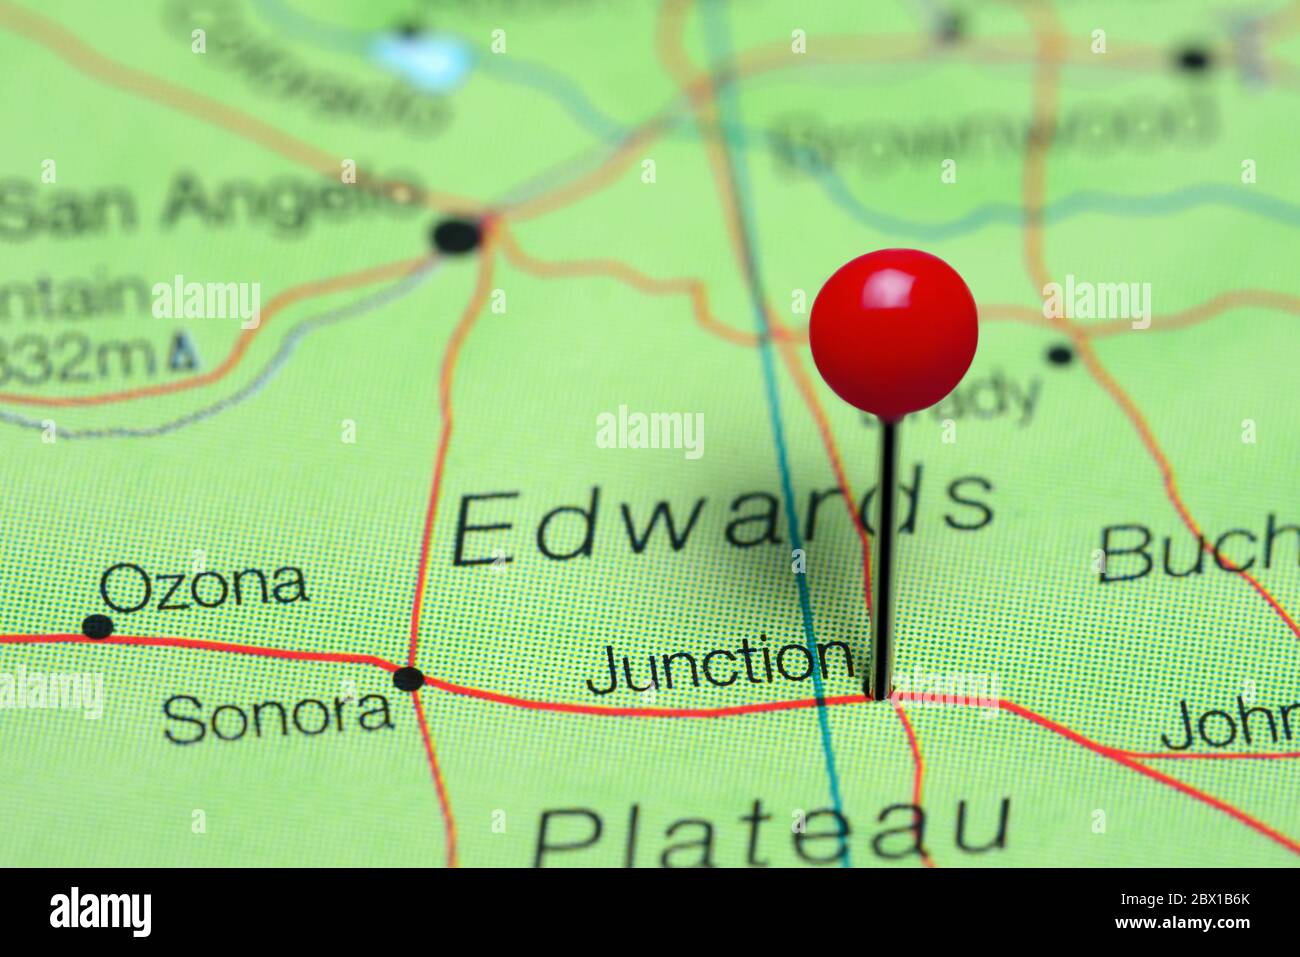 Junction pinned on a map of Texas, USA Stock Photo